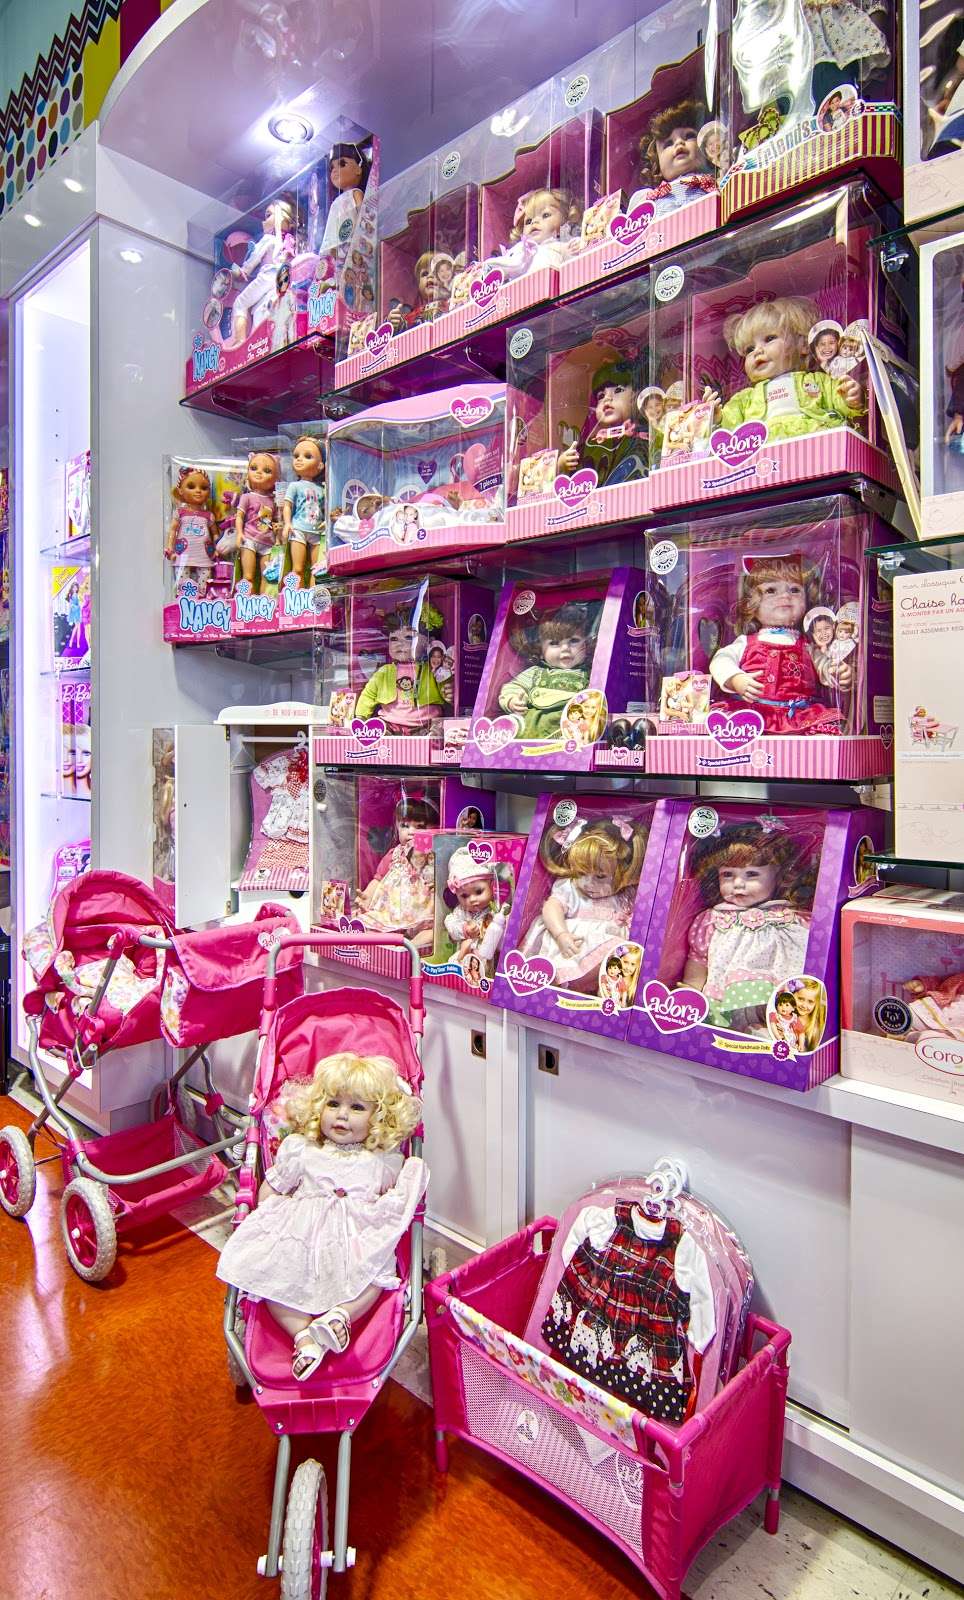 Crave Toys & Gifts | 9169 W Atlantic Ave, Delray Beach, FL 33446, USA | Phone: (561) 270-3834